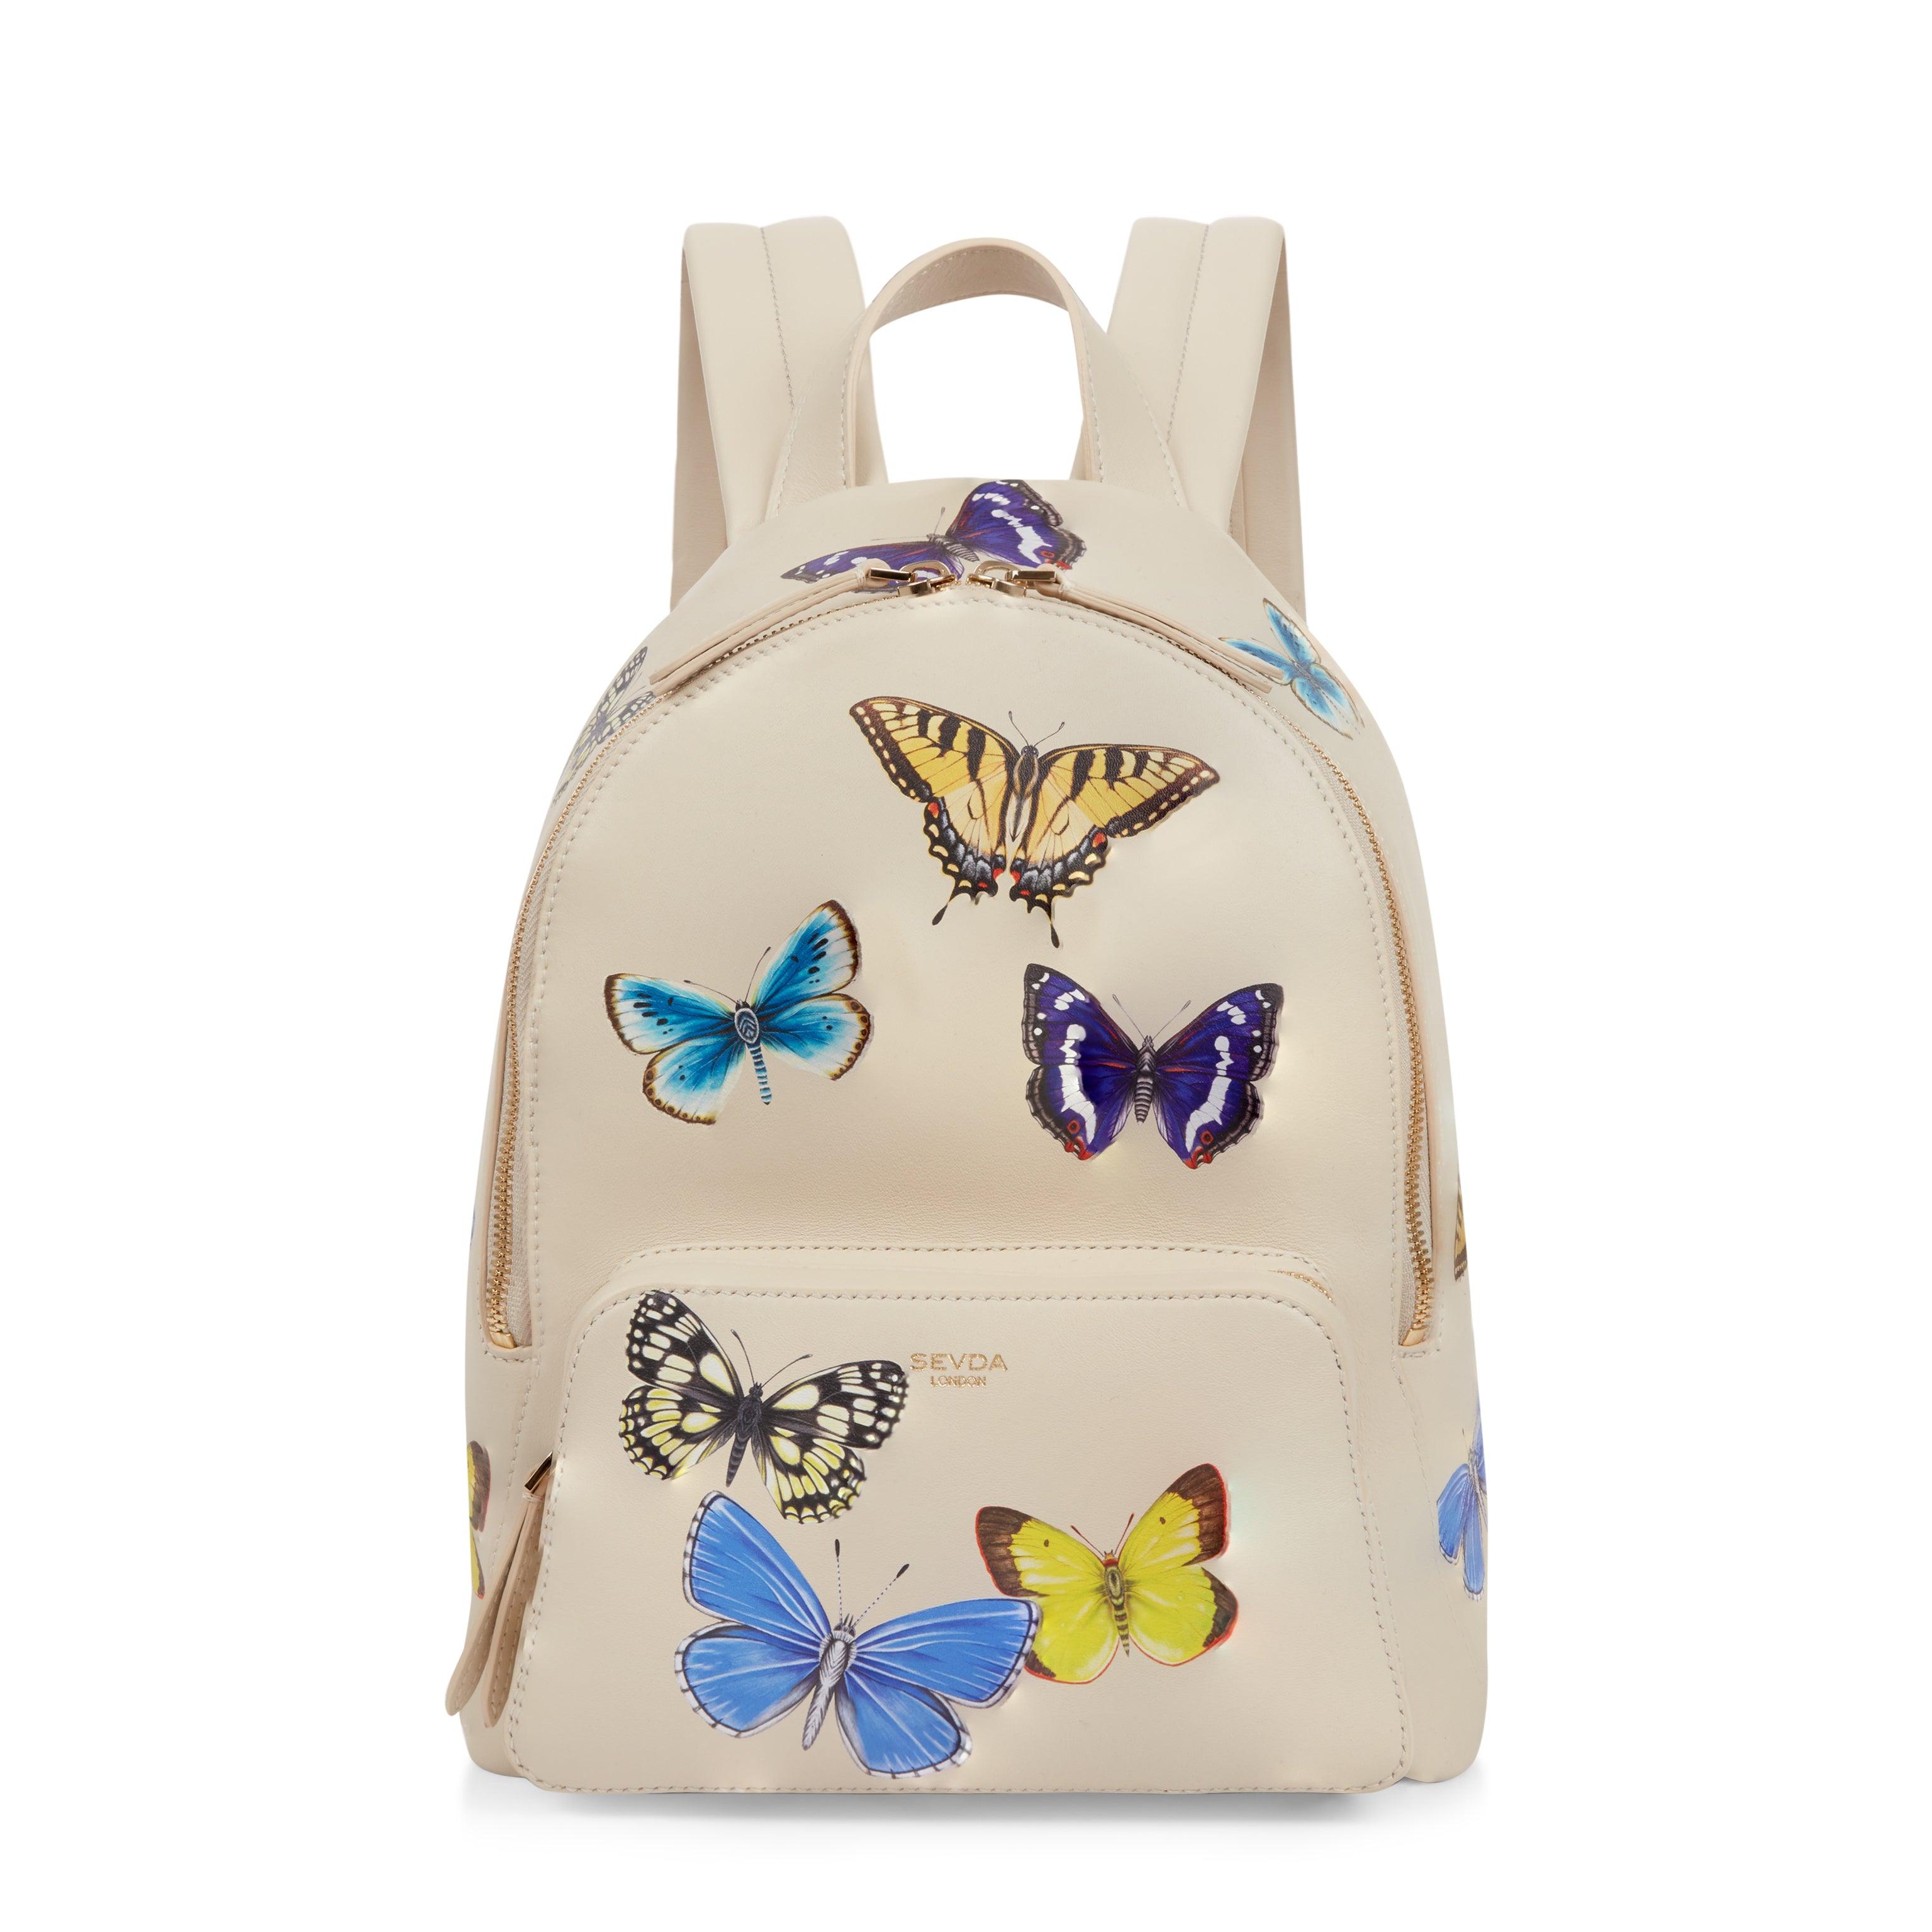 Ivory Backpack with Butterflies Print - The fusion of London's design and Italian craftsmanship.